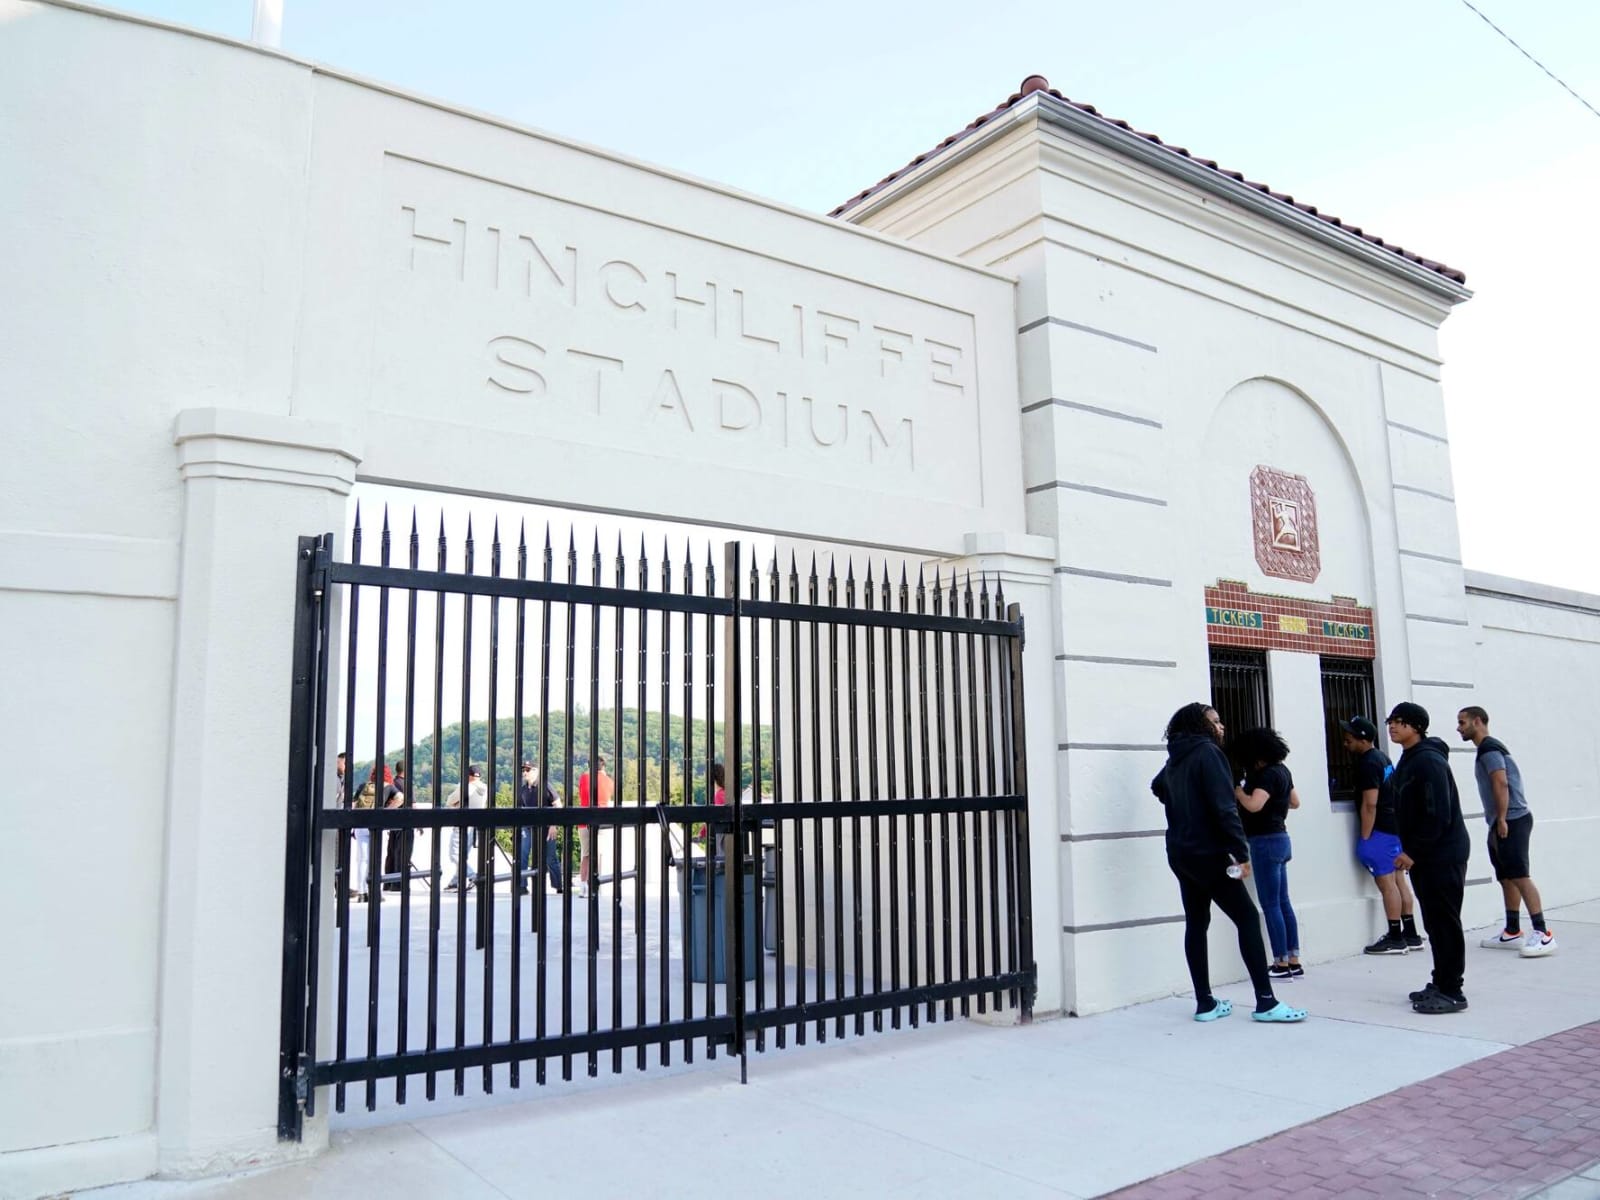 Historic Negro Leagues ballpark Hinchliffe Stadium reopens after